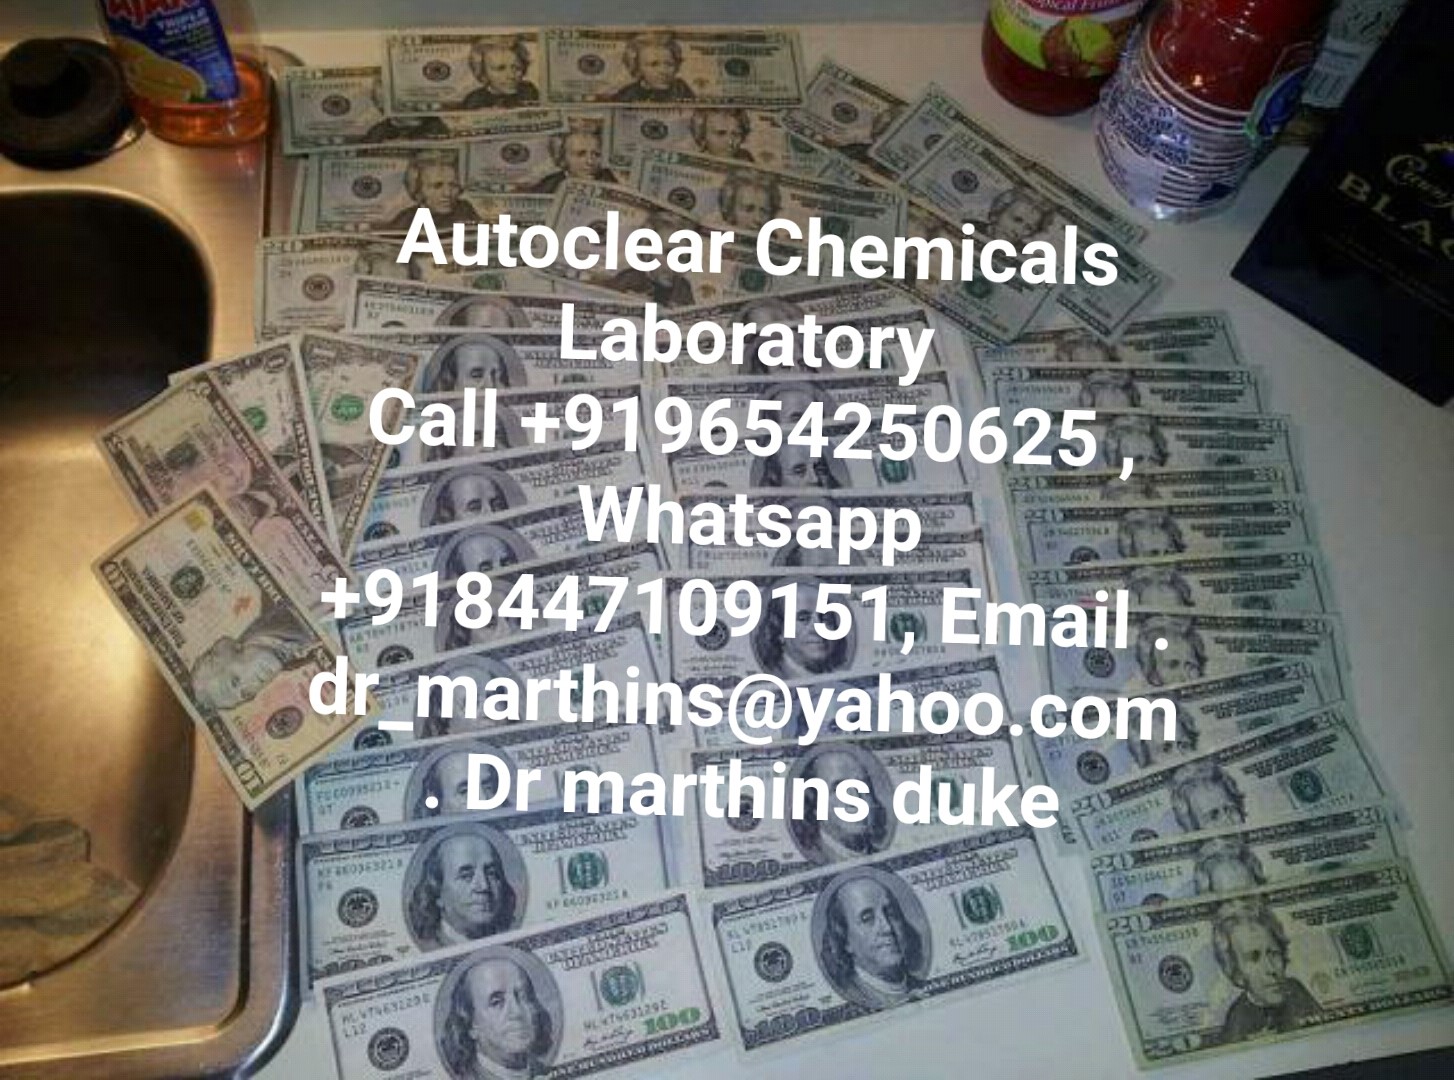 SSD CHEMICALS AUTOMATIC SOLUTION FOR CLEANING BLACK MONEY /Call +918447109151